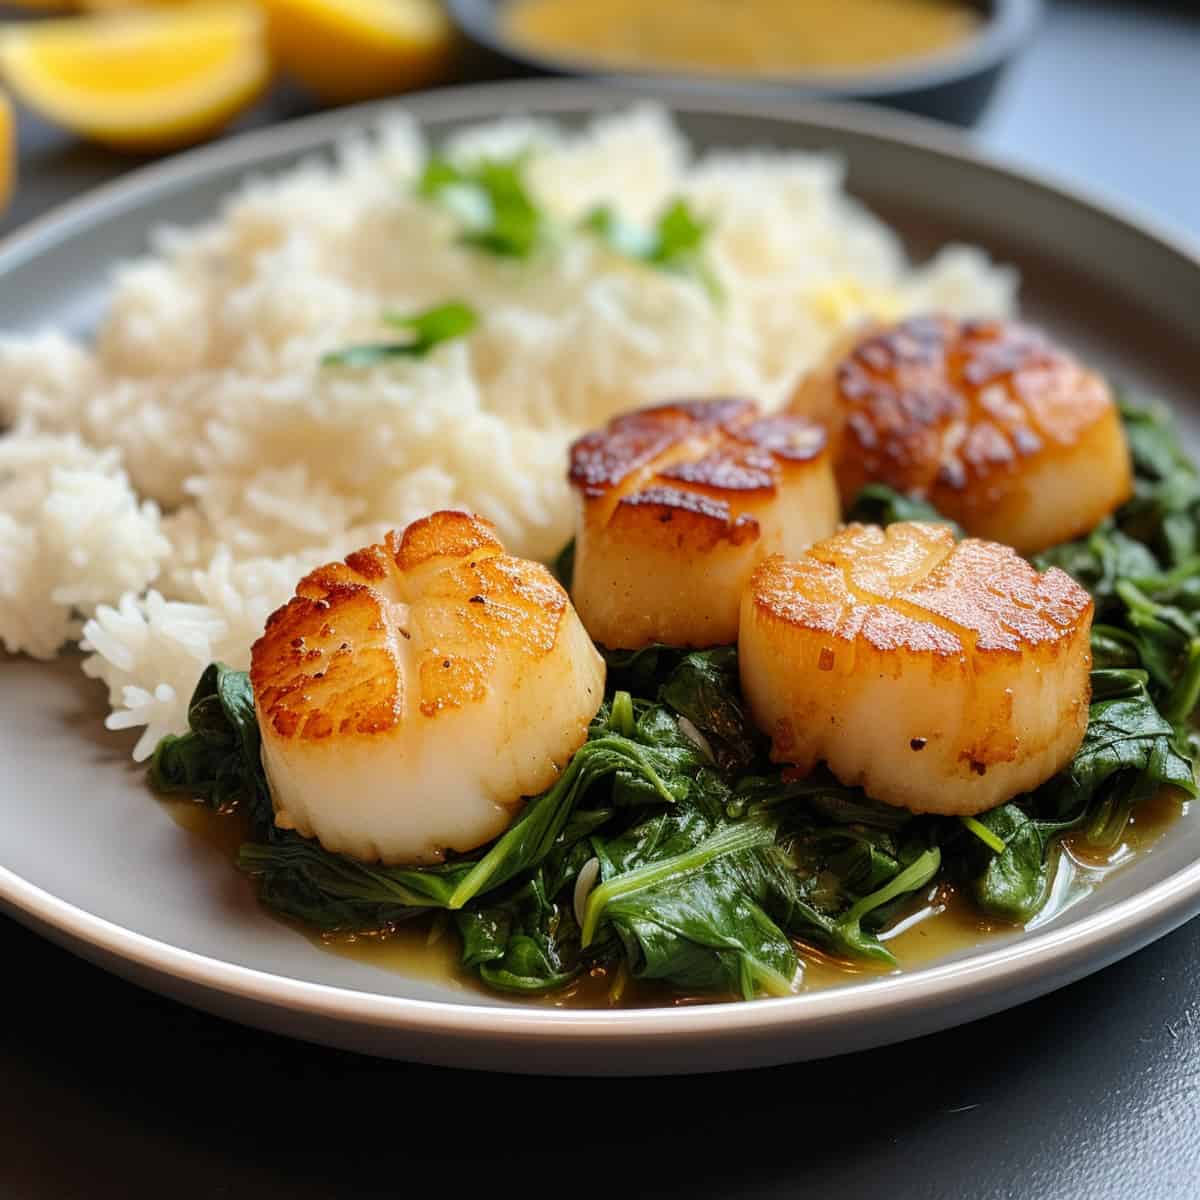 A plate of scallops with some wilted spinach and white rice.